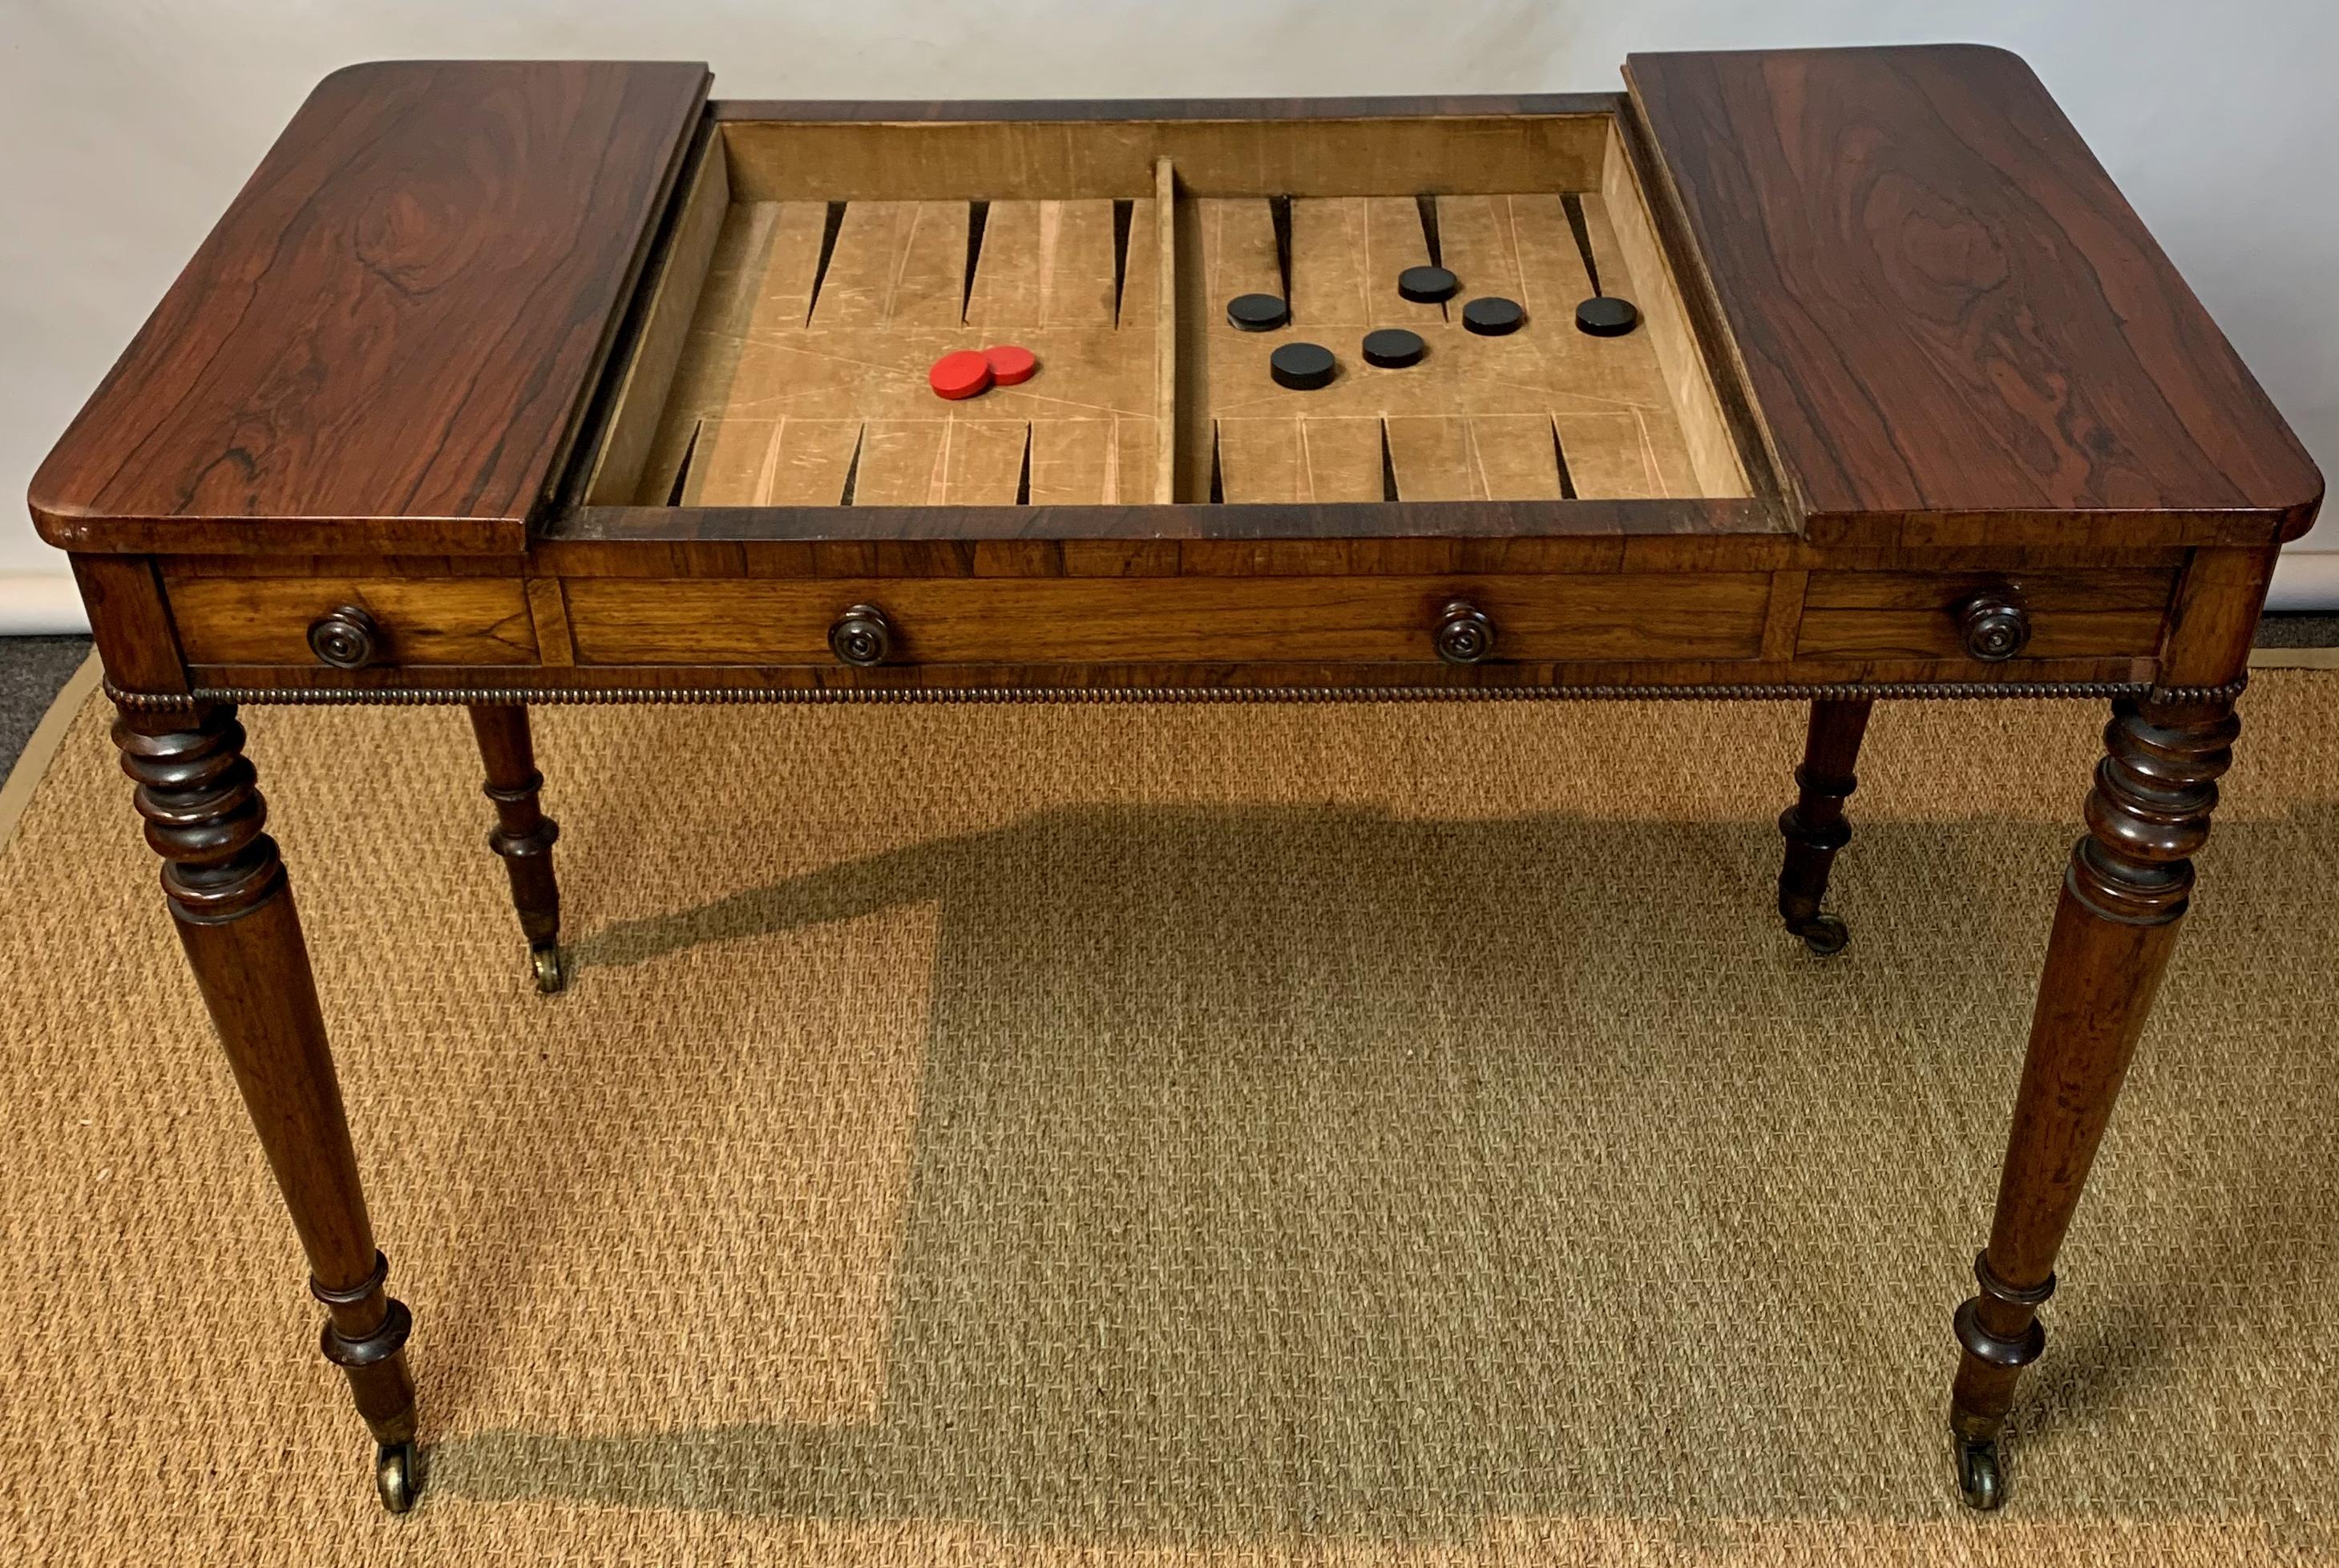 Mid-19th Century English William IV Games or Tric Trac Table